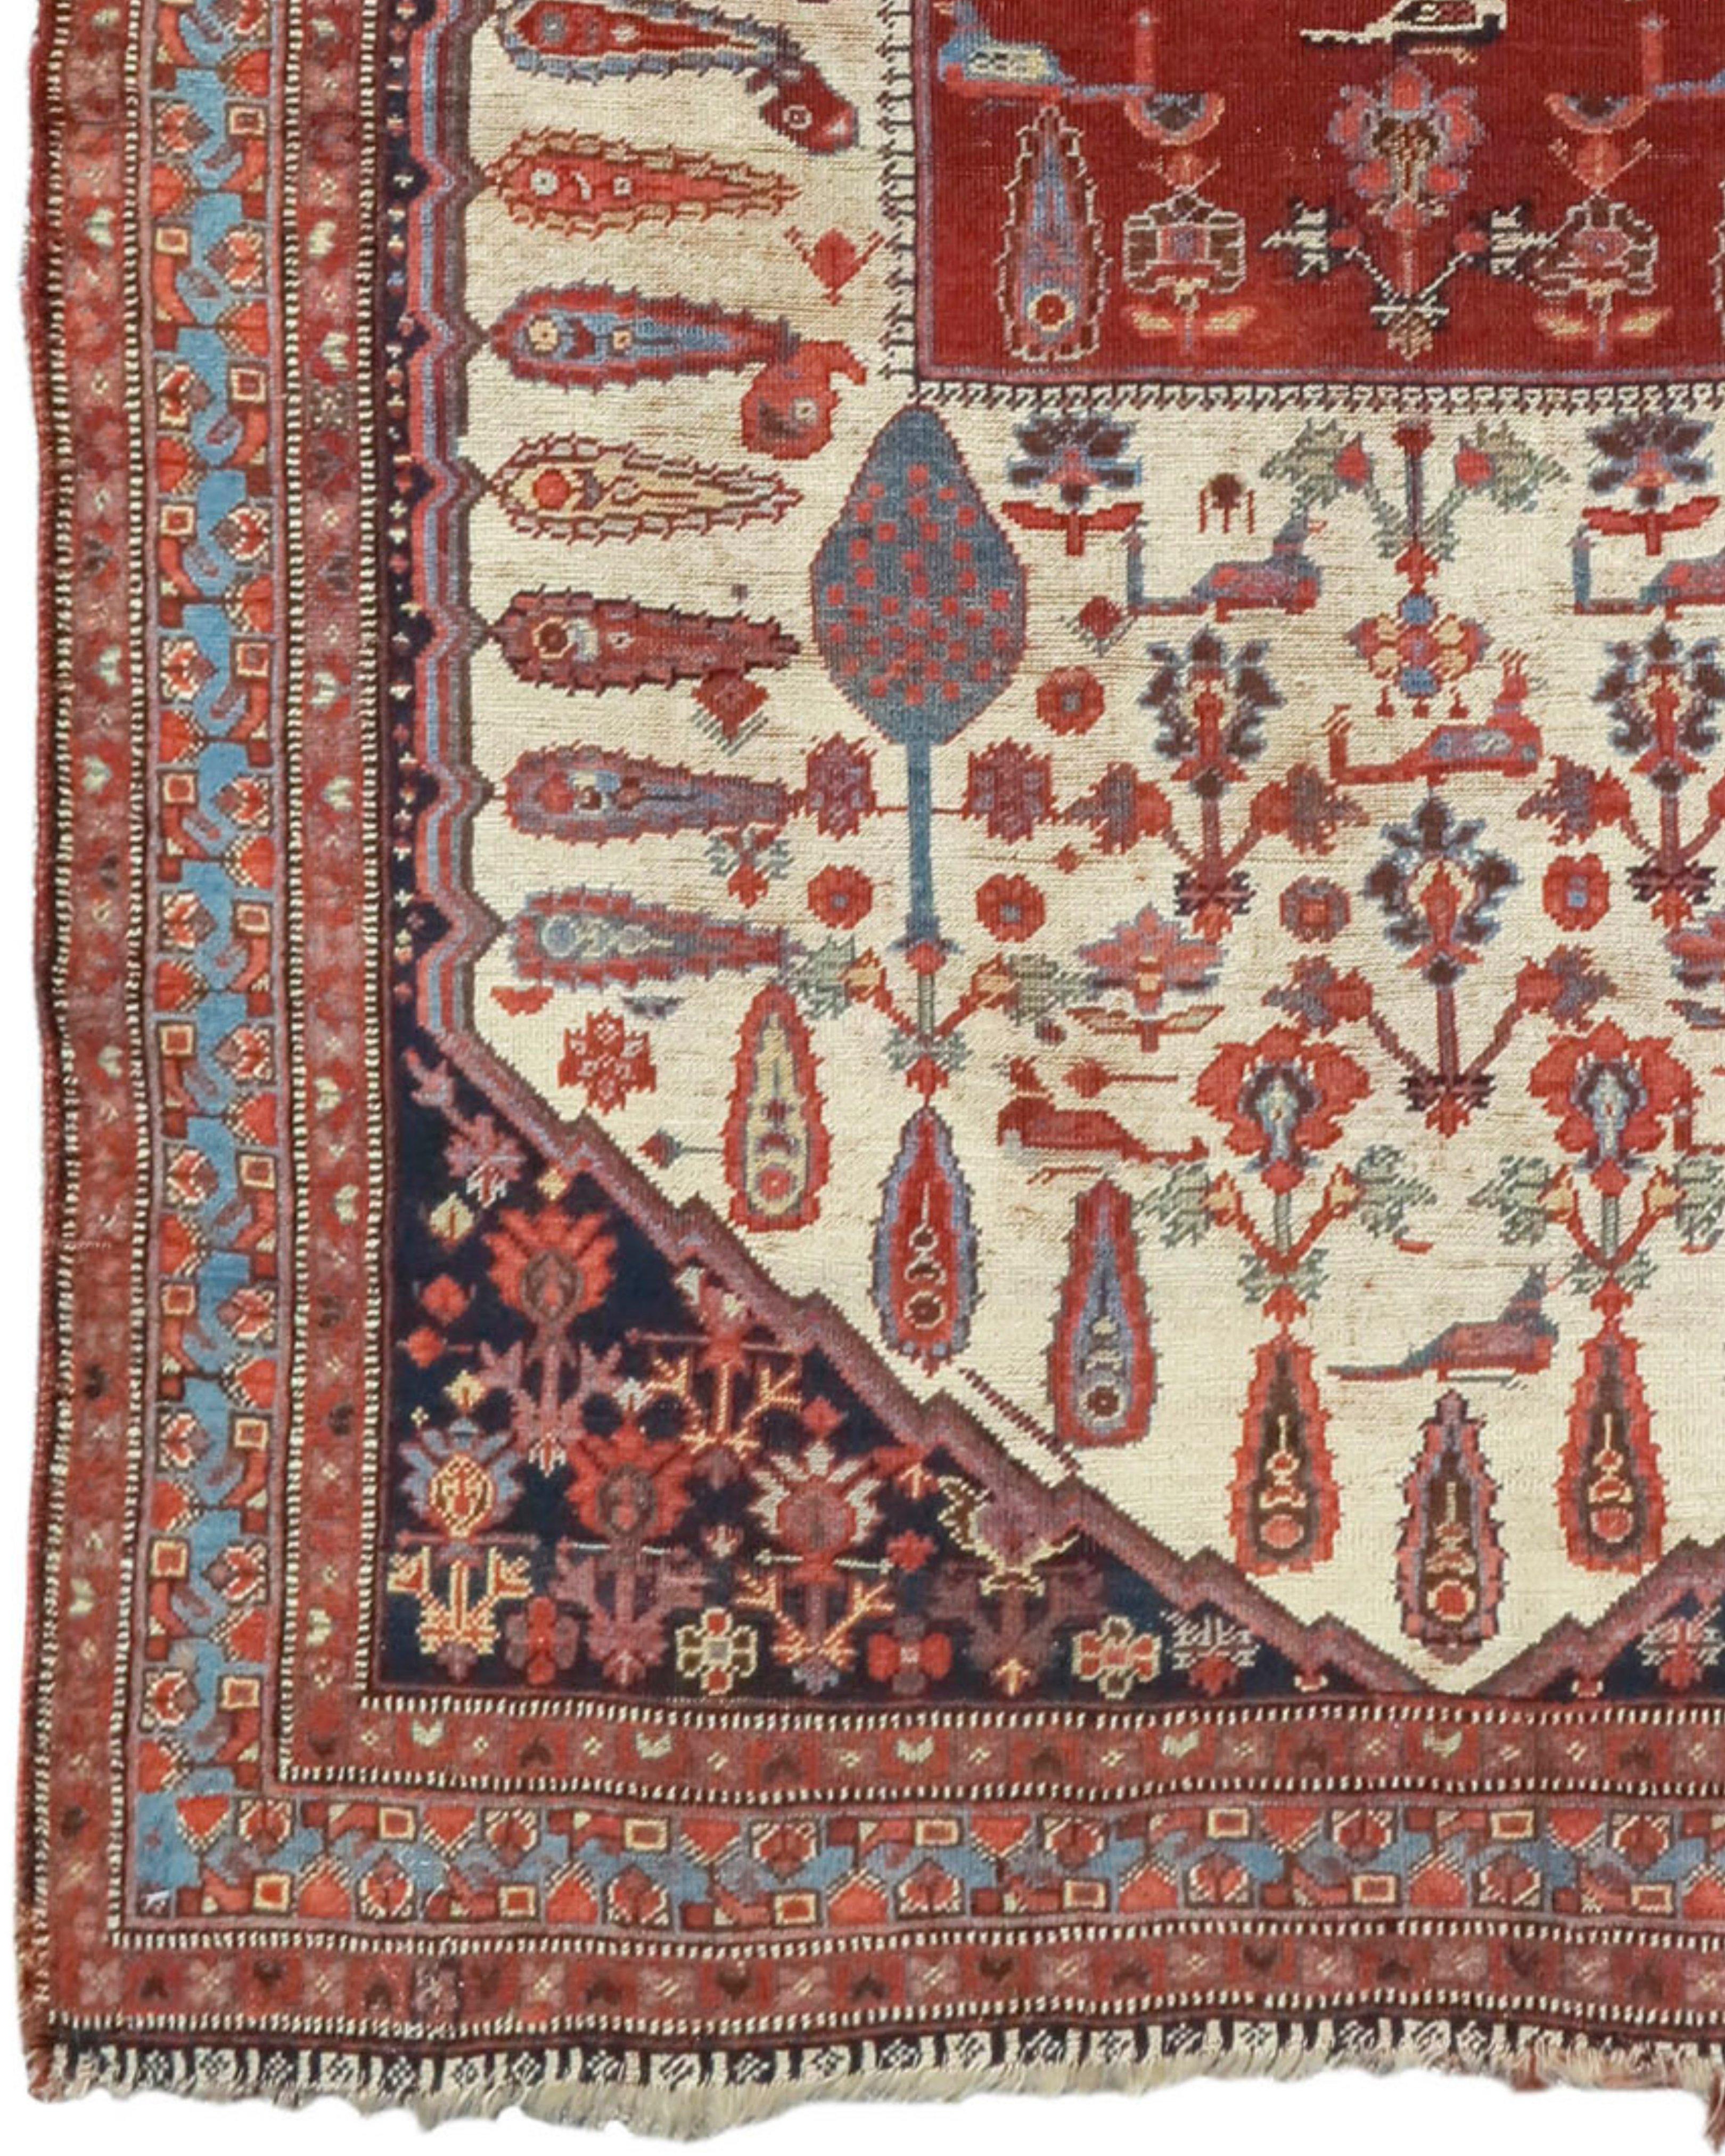 Antique Persian Khamseh Rug, Mid-19th Century

Additional Information:
Dimensions: 4'0